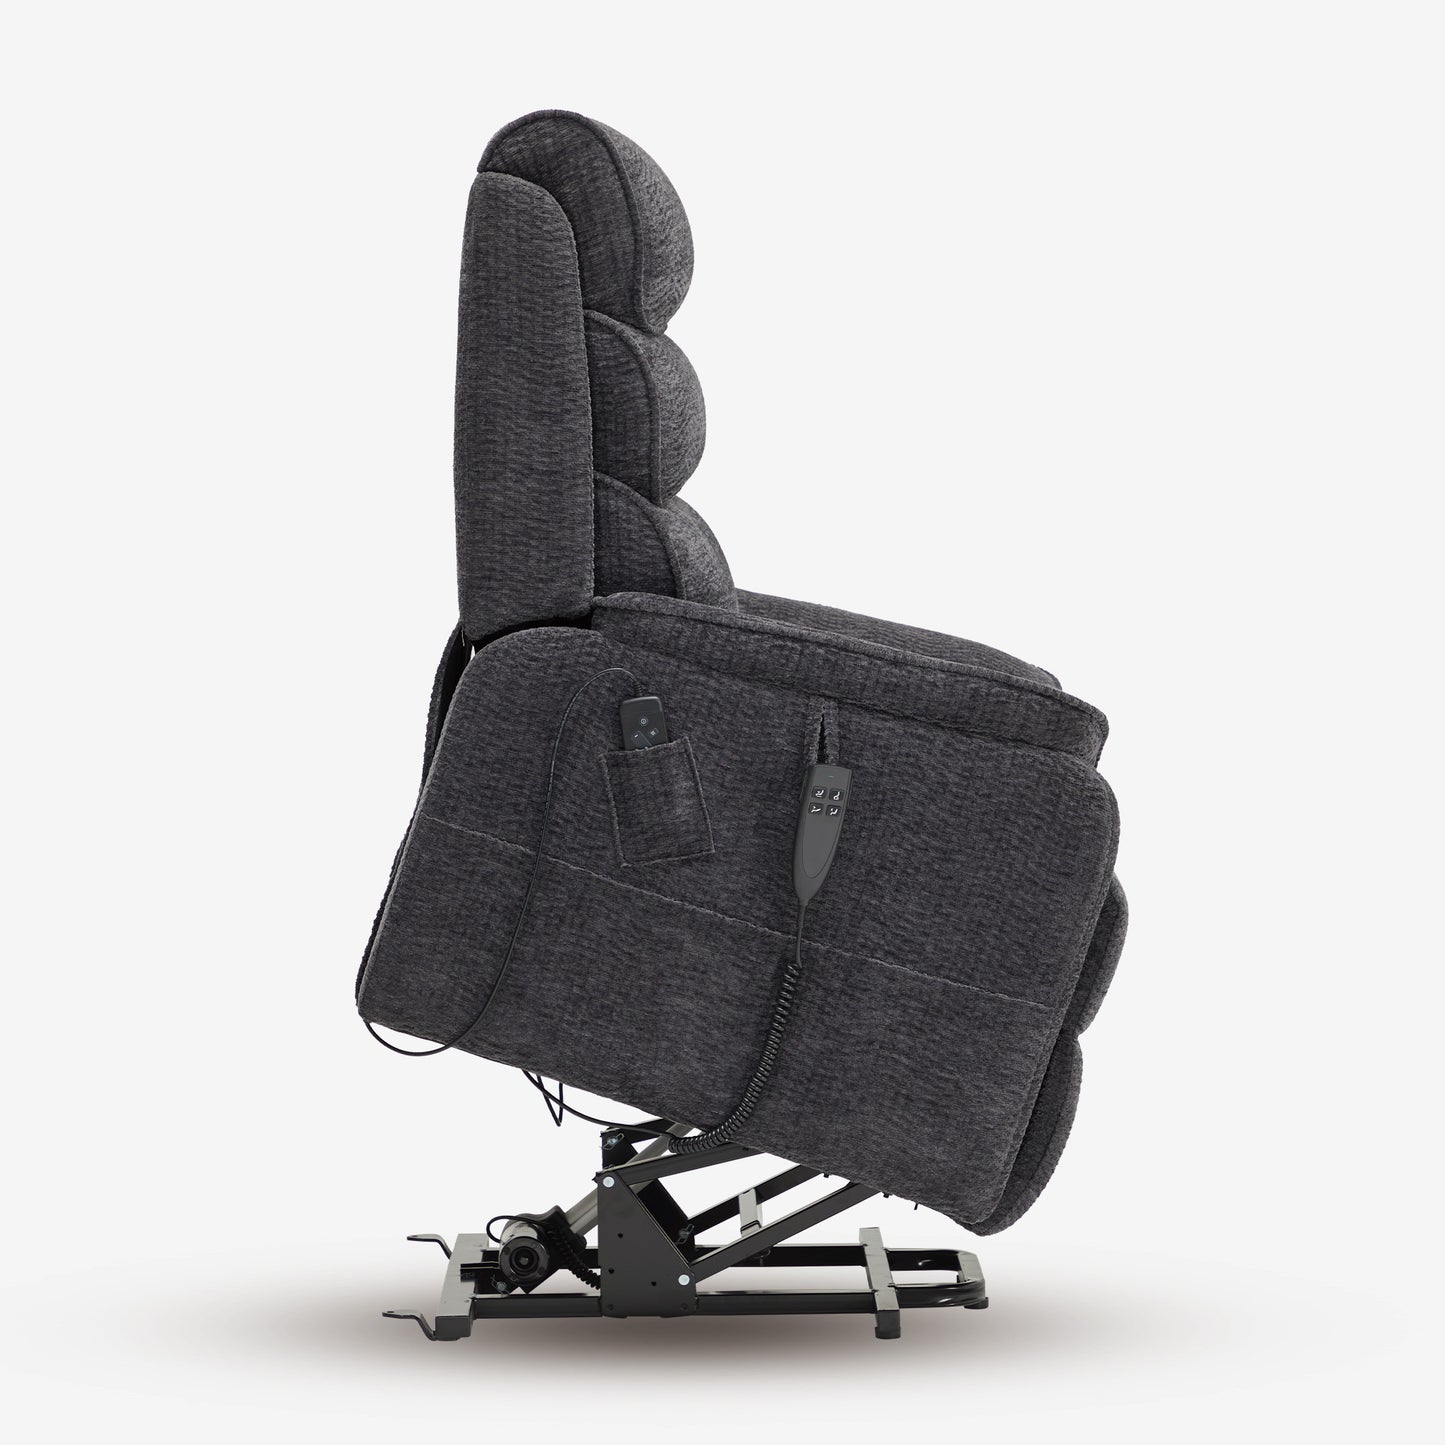 Sleeping Chairs For The Elderly With Infinite Positions Full Lay Flat